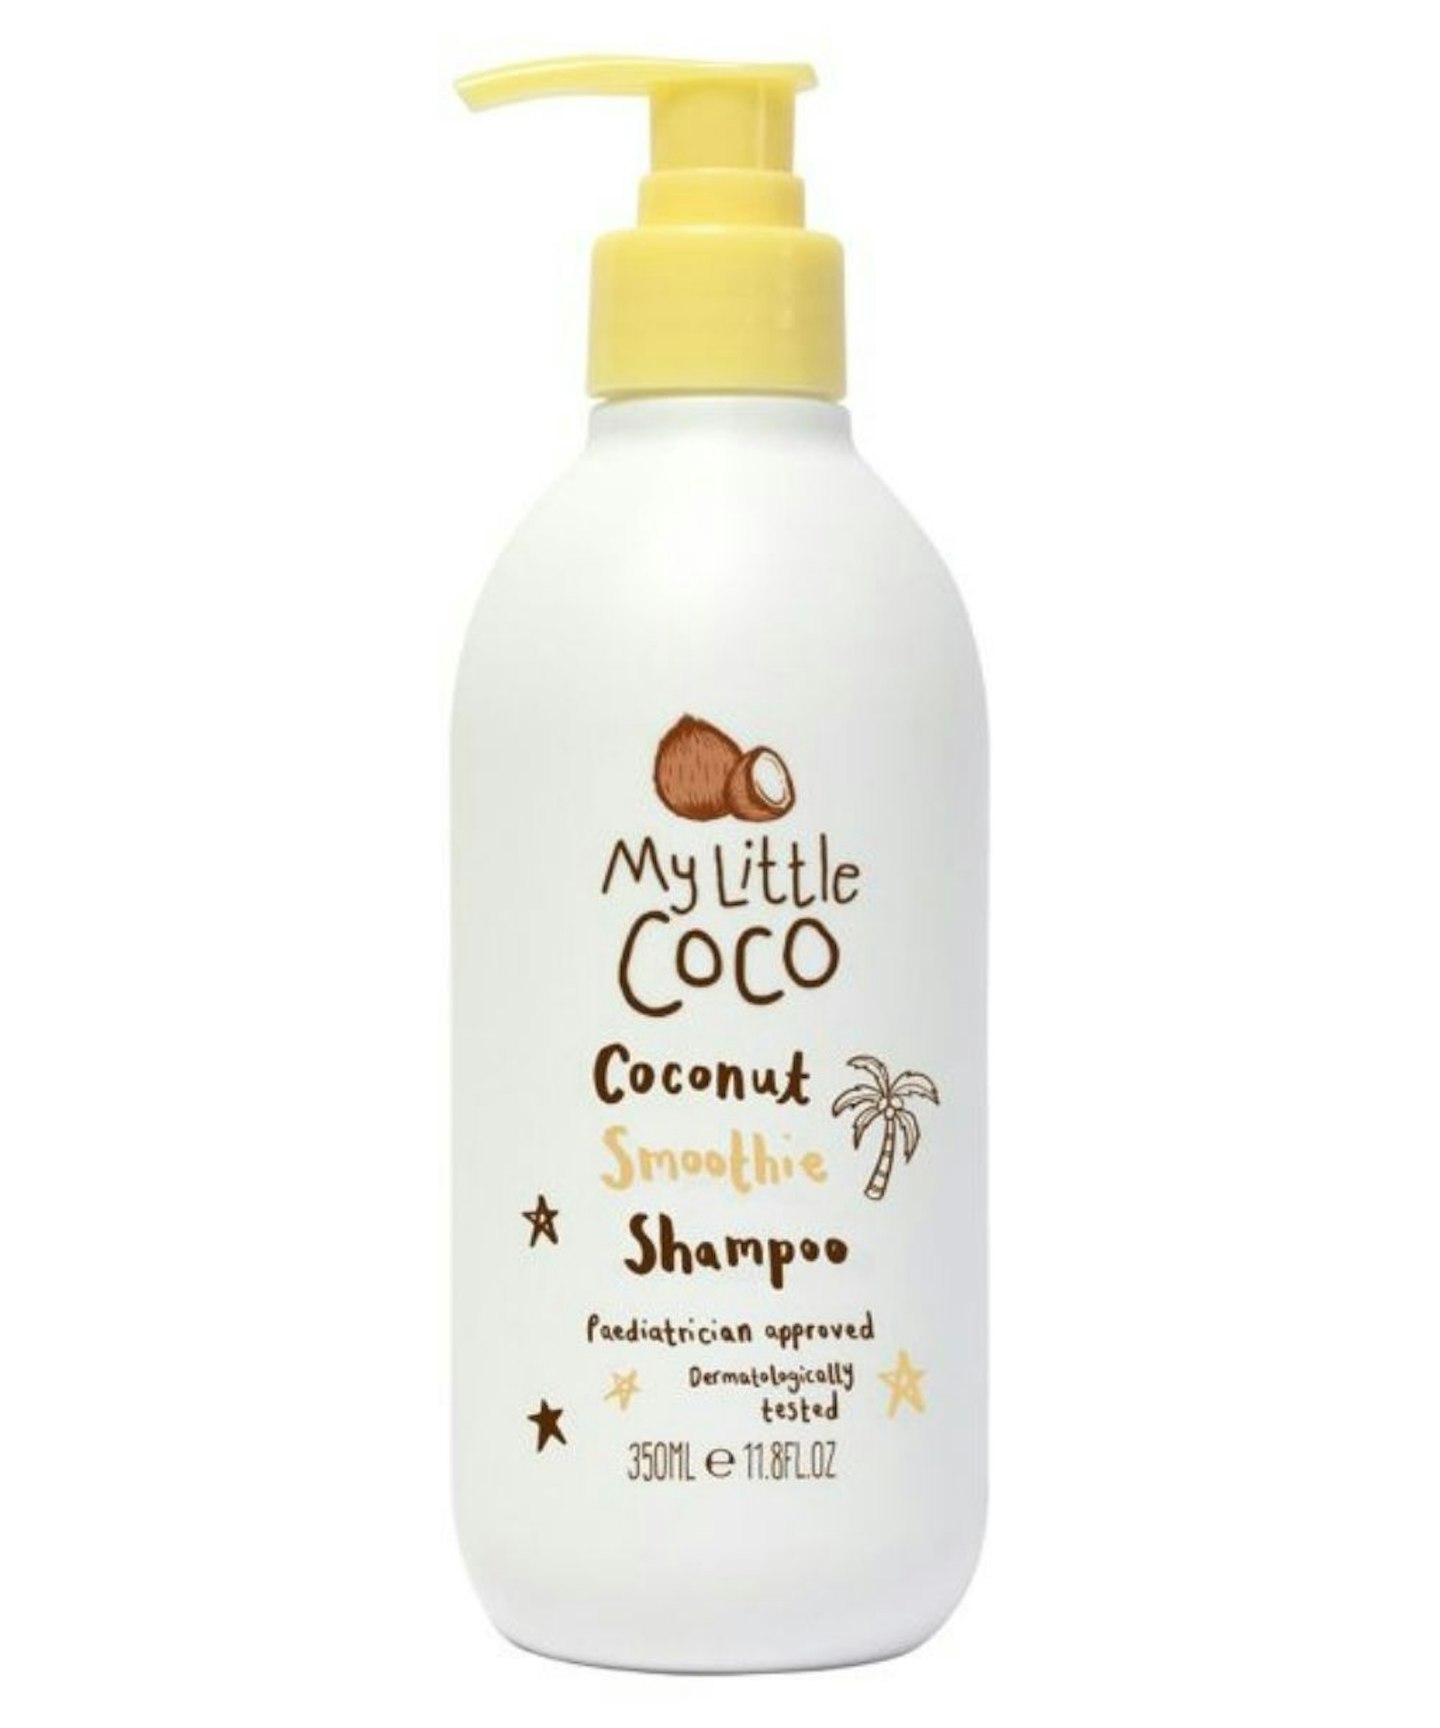 My Little Coco Coconut Smoothie Shampoo